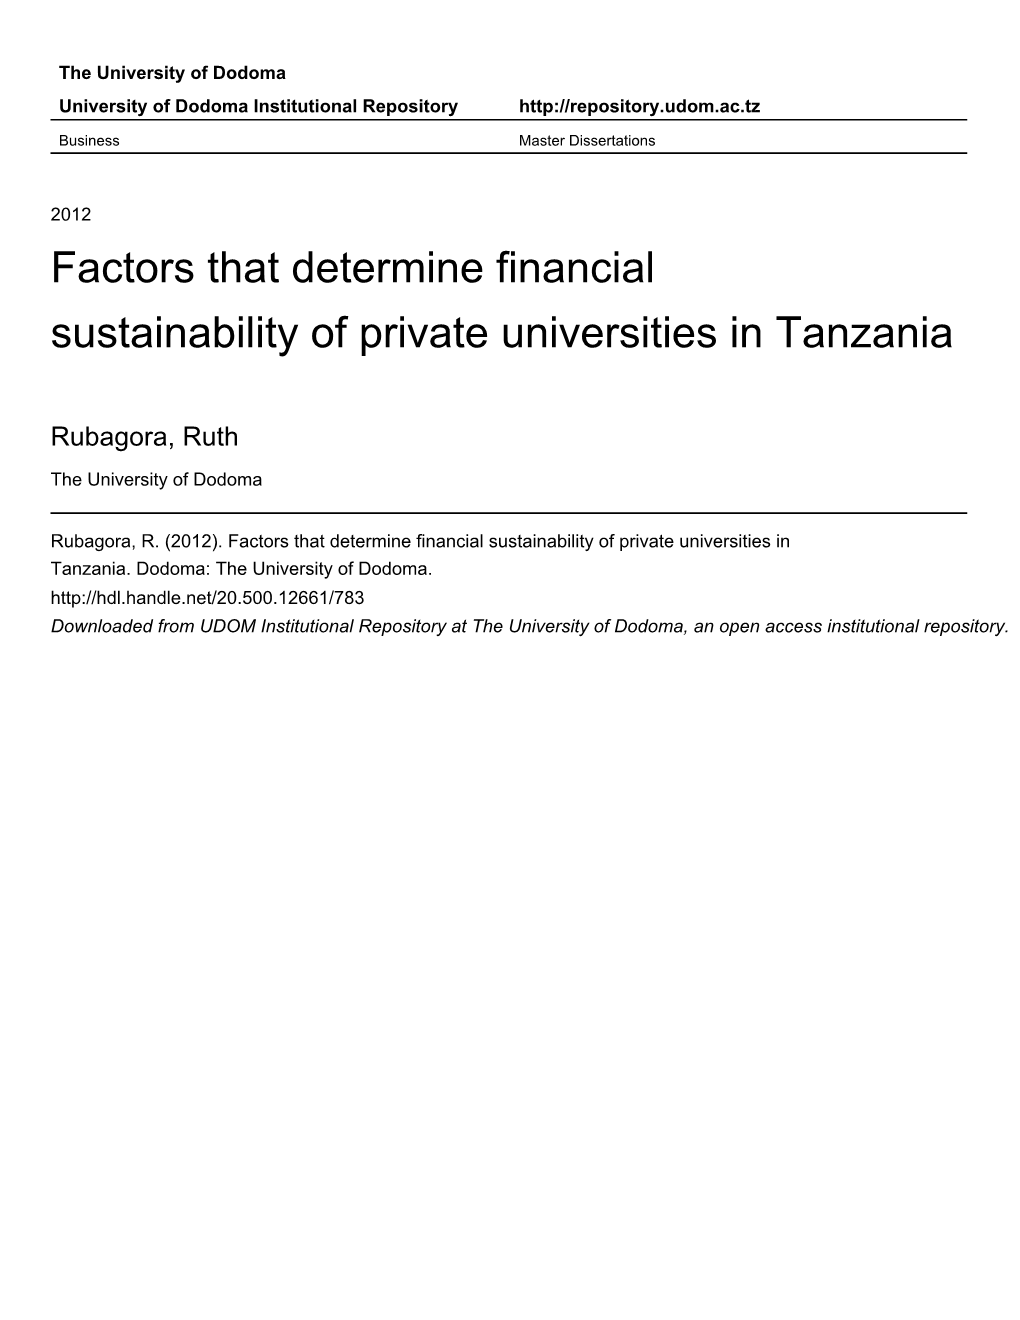 Factors That Determine Financial Sustainability of Private Universities in Tanzania